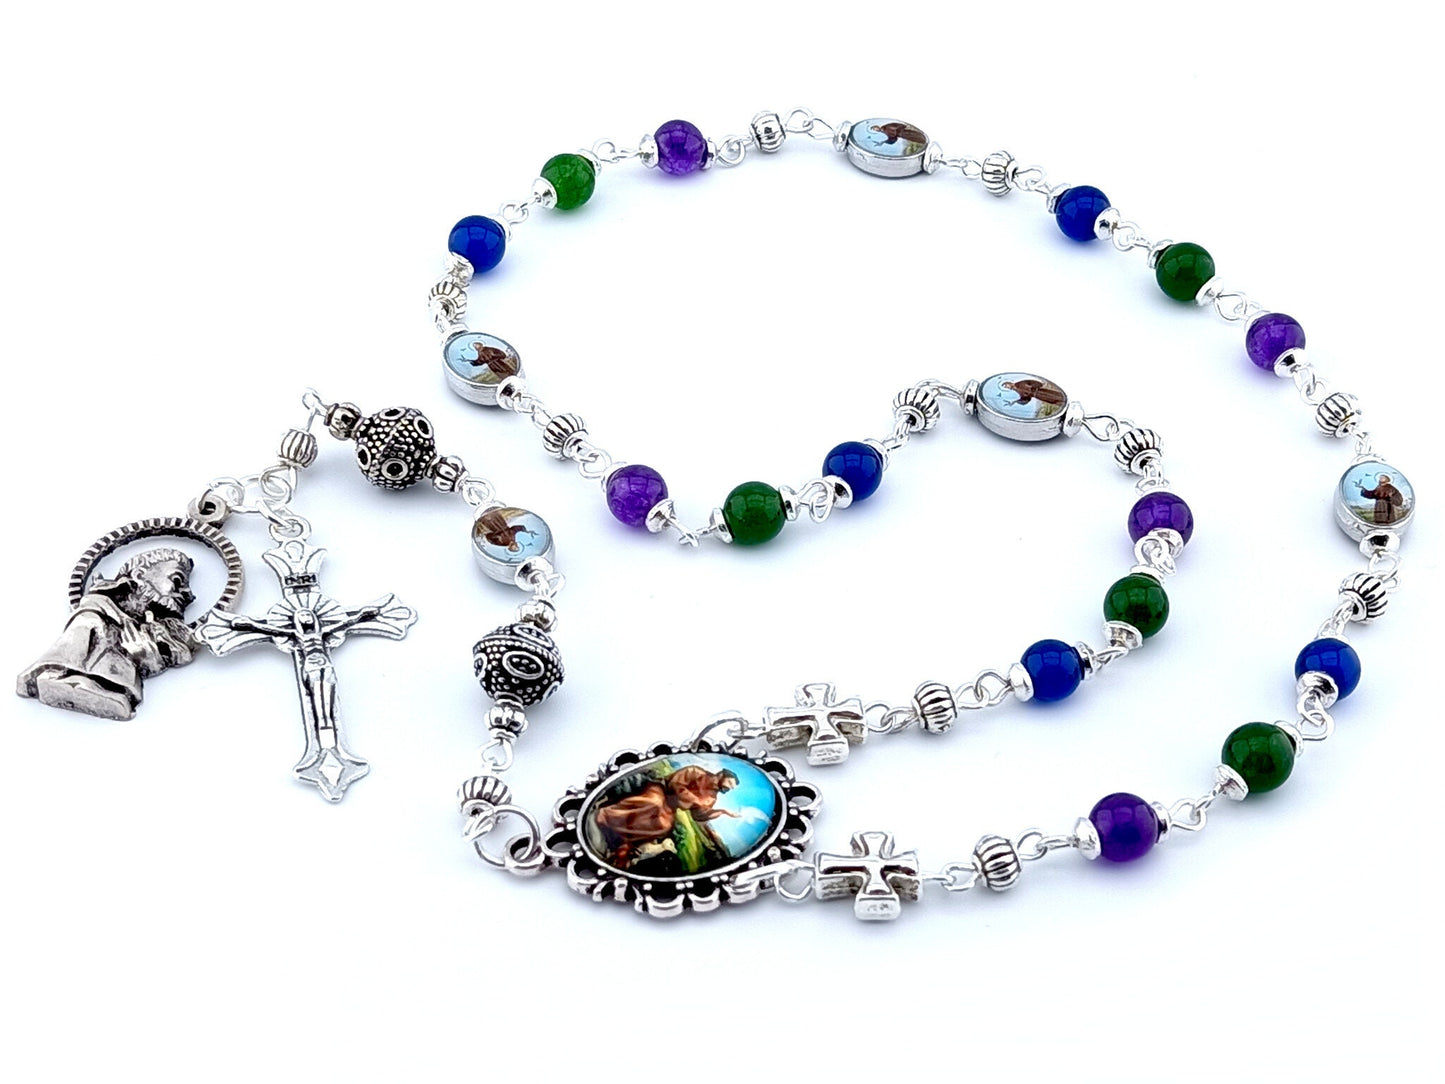 Saint Francis of Assisi unique rosary beads prayer chaplet with agate gemstone beads, silver crucifix, beads and picture medals.